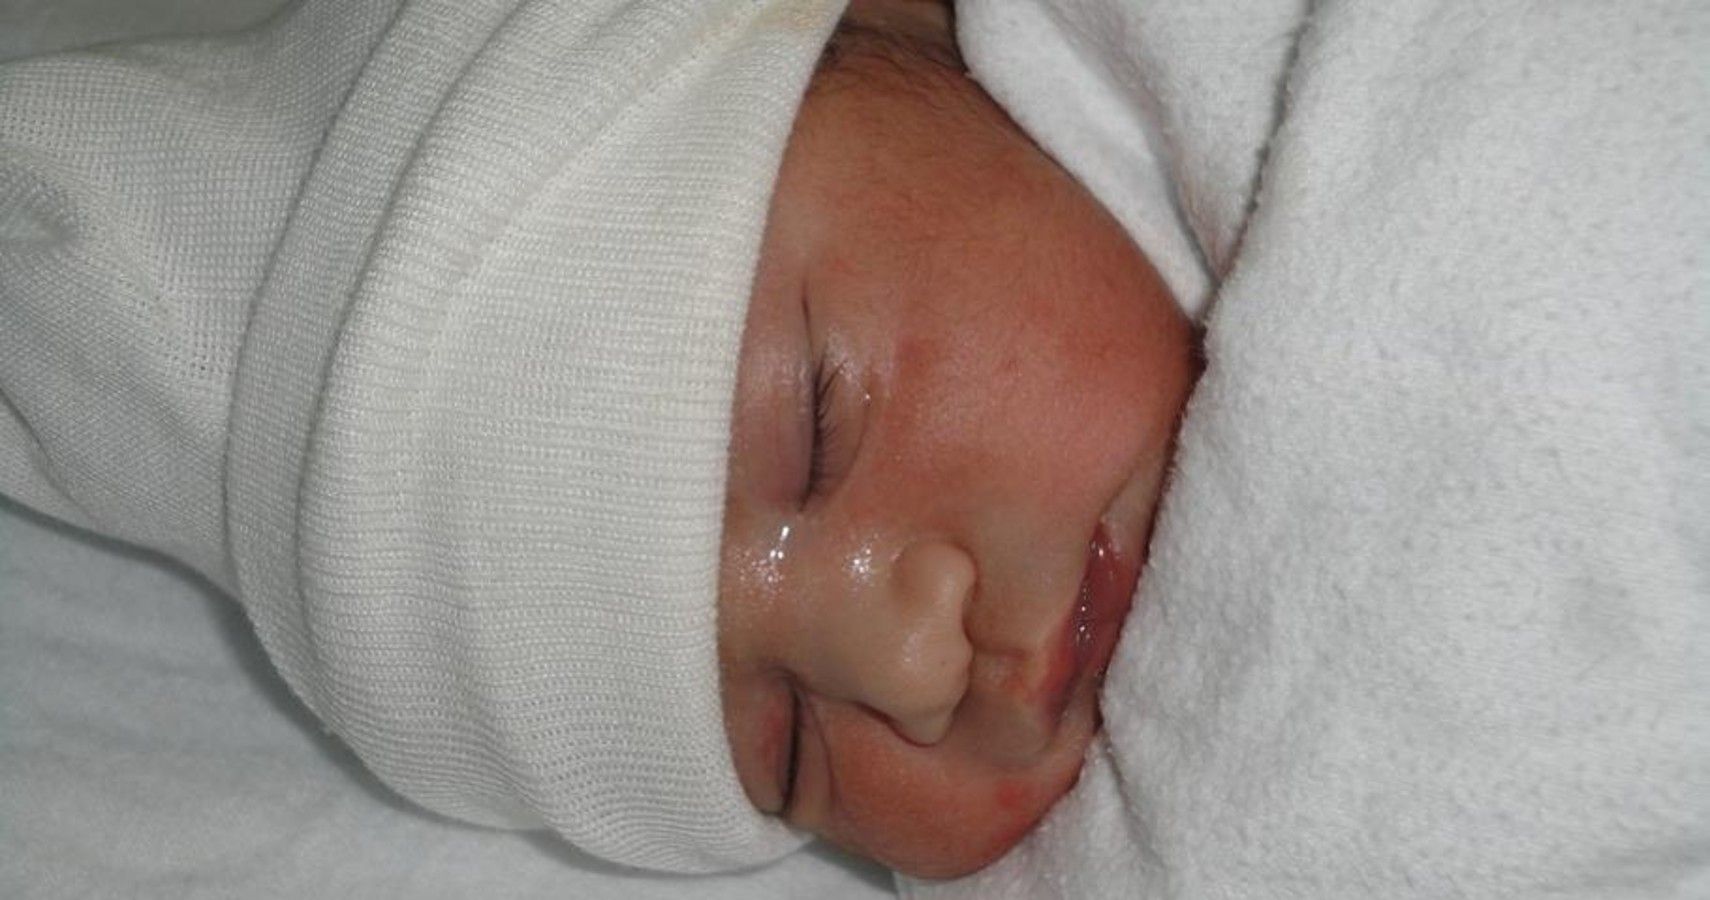 Newborn sleeping, and they might have some skin discoloration.